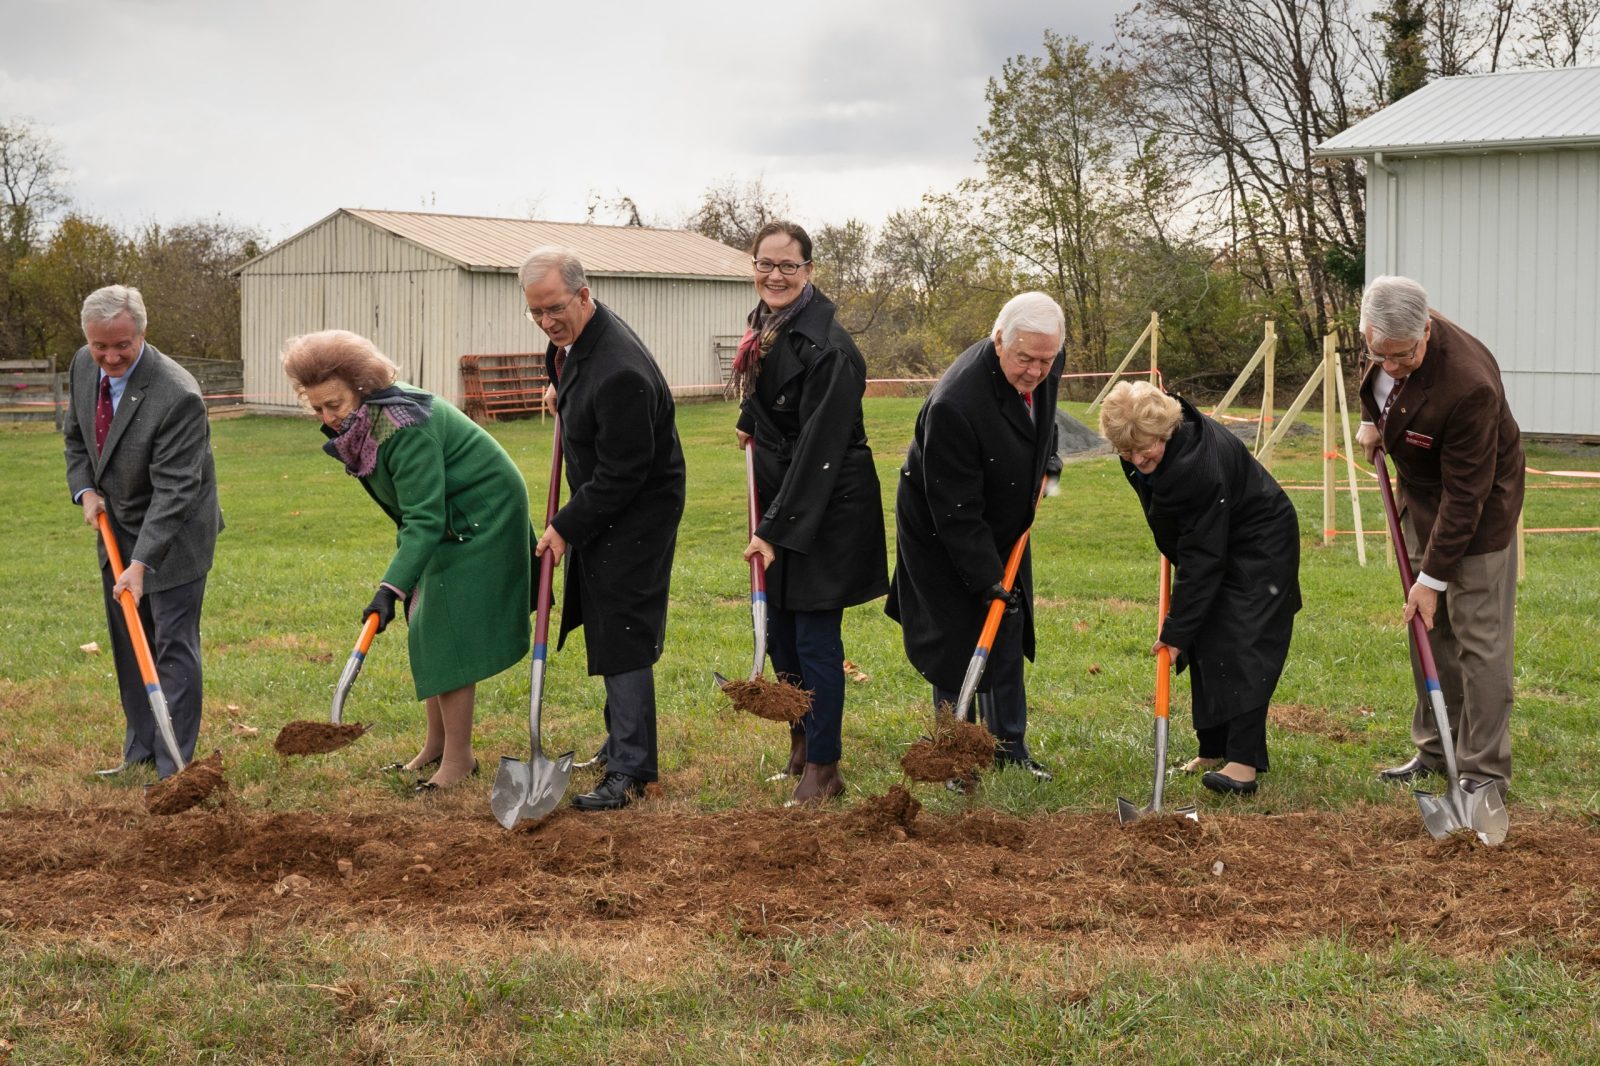 From left, Michael Erskine, Beverly "Peggy" Steinman, Frank Batten, Aimee Batten, Joe May, Bobby May, and Gregory B. Daniel break ground for the Steven and Jane Hale Indoor Arena. Photo by Devon Rowland for Virginia Tech.